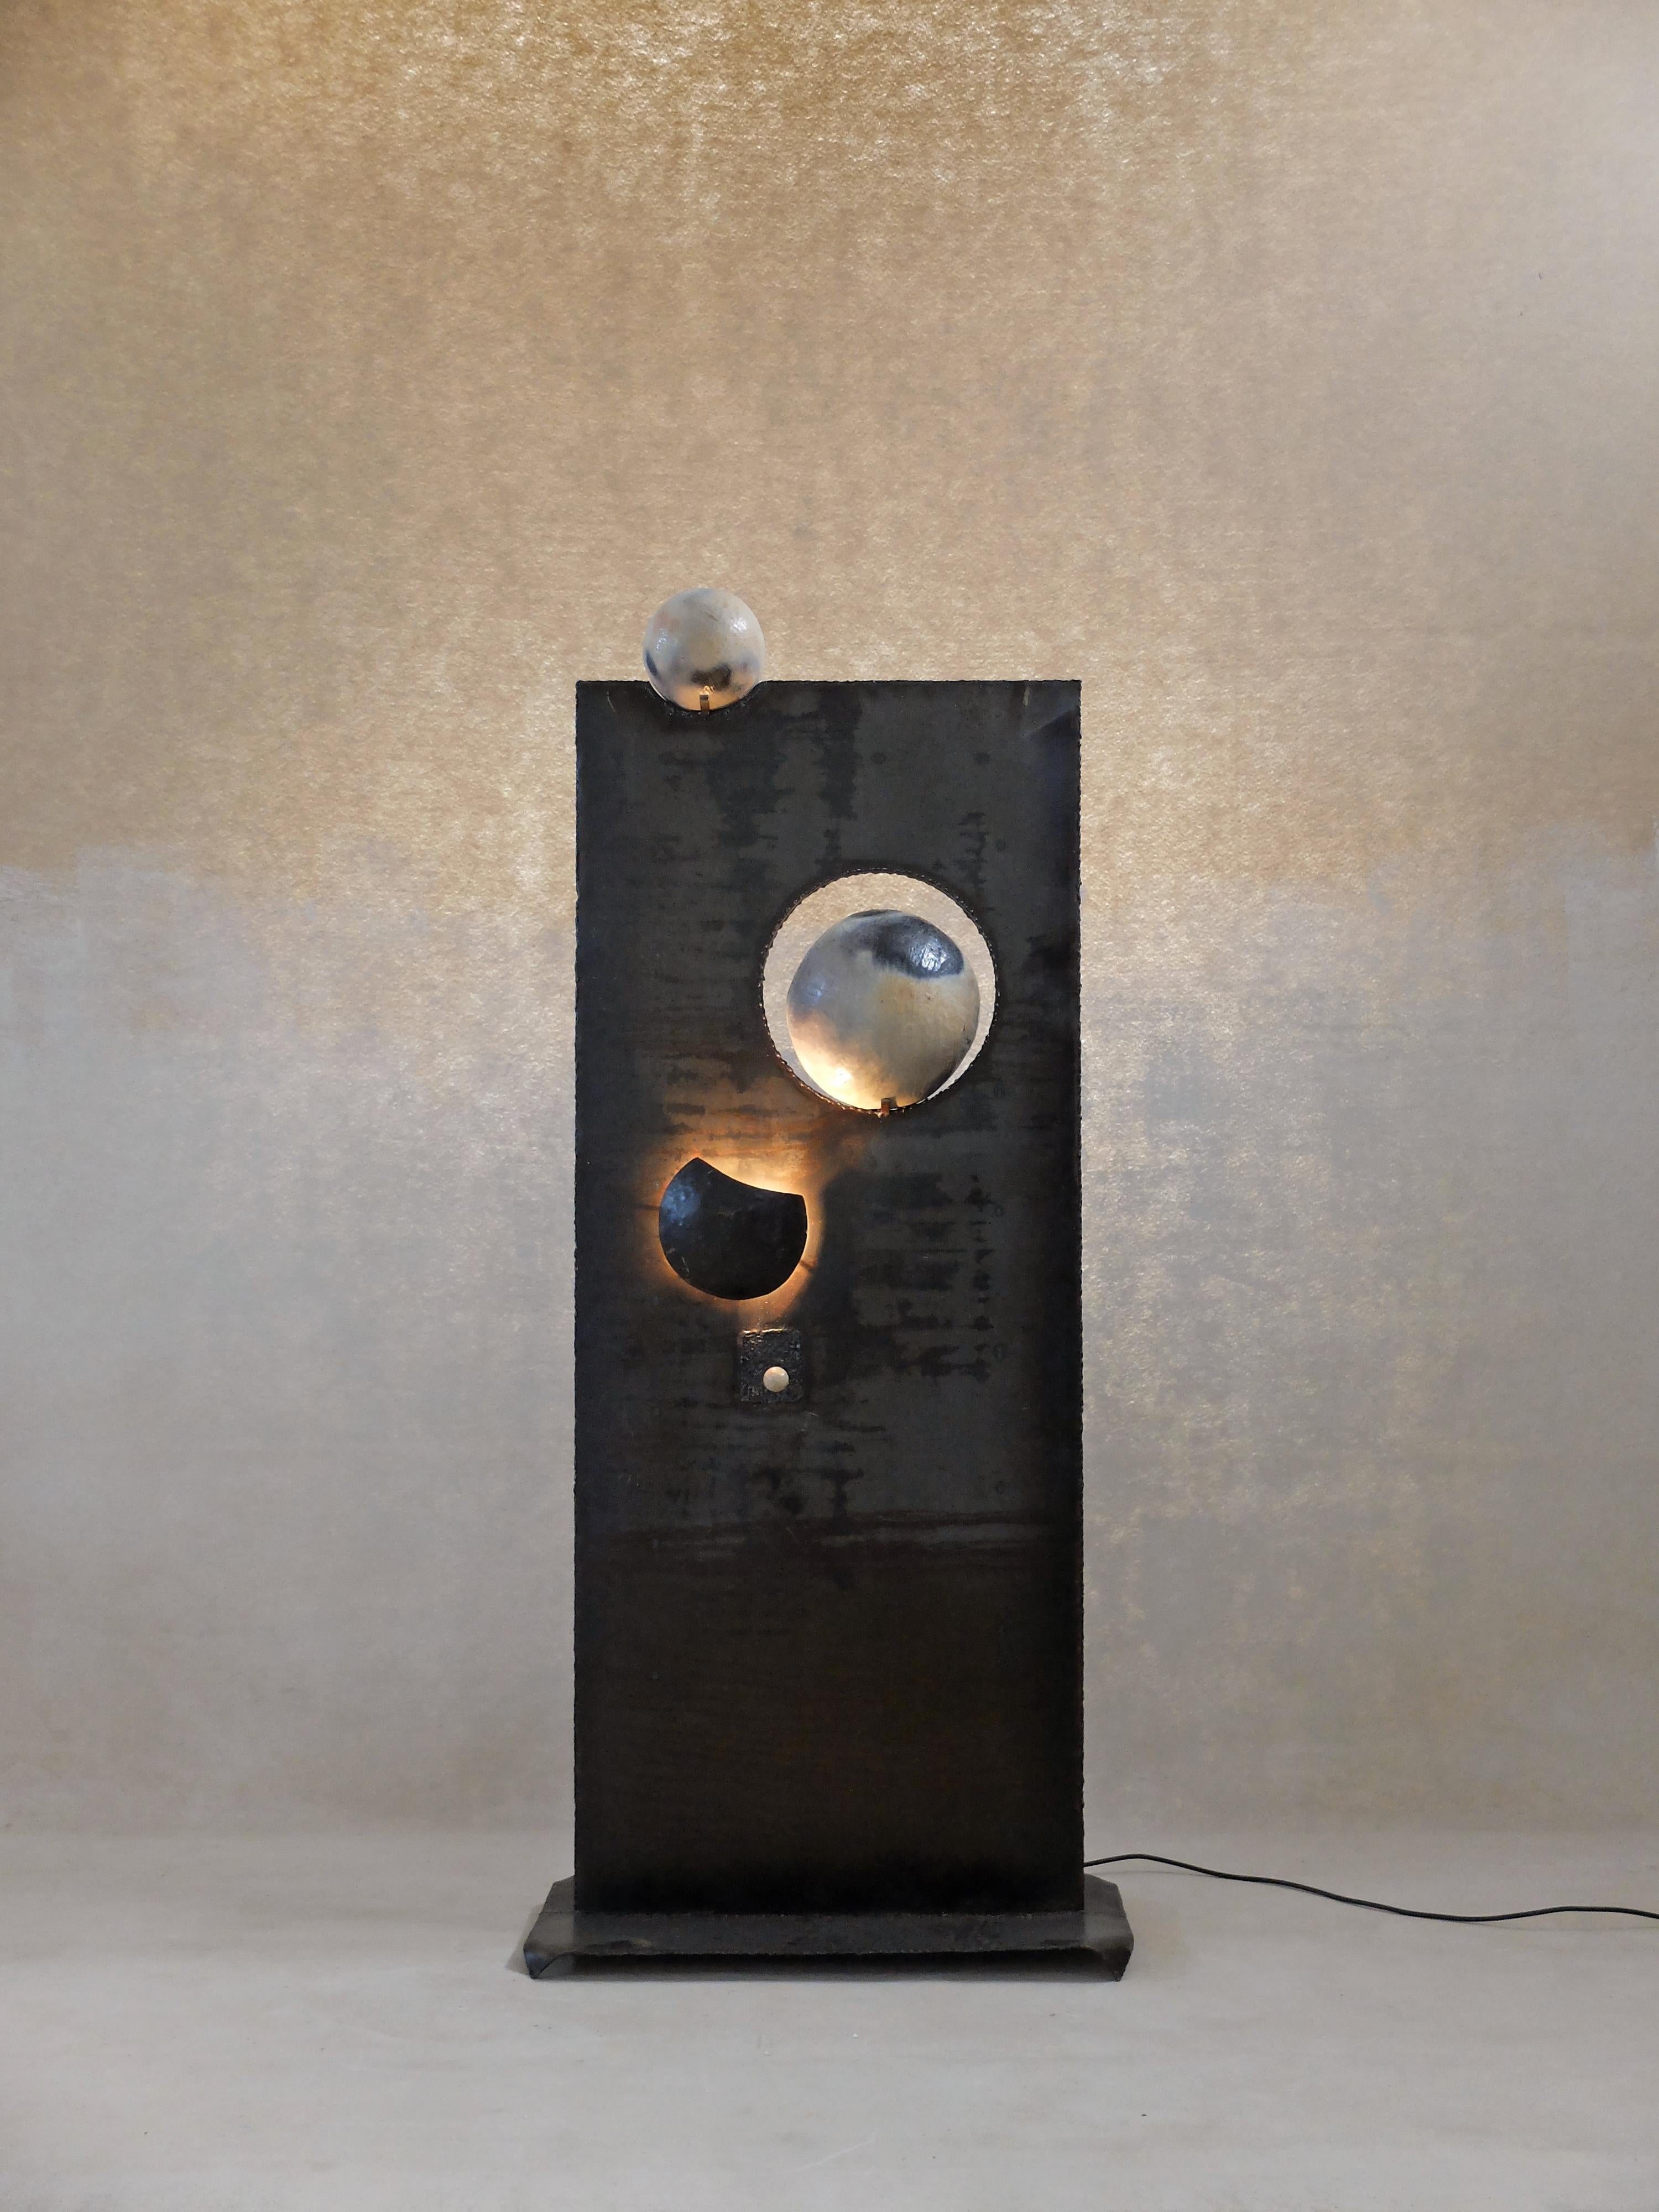 Grande Conjonction Light Sculpture by Altin
Designed and developed by Yasmine Sfar and Mehdi Kebaier.
Dimensions: D 70 x W 45 x H 170 cm
Materials: Metal, ceramic.

Light sculpture in clay and metal.

Orbit
A journey to a new dream world that we